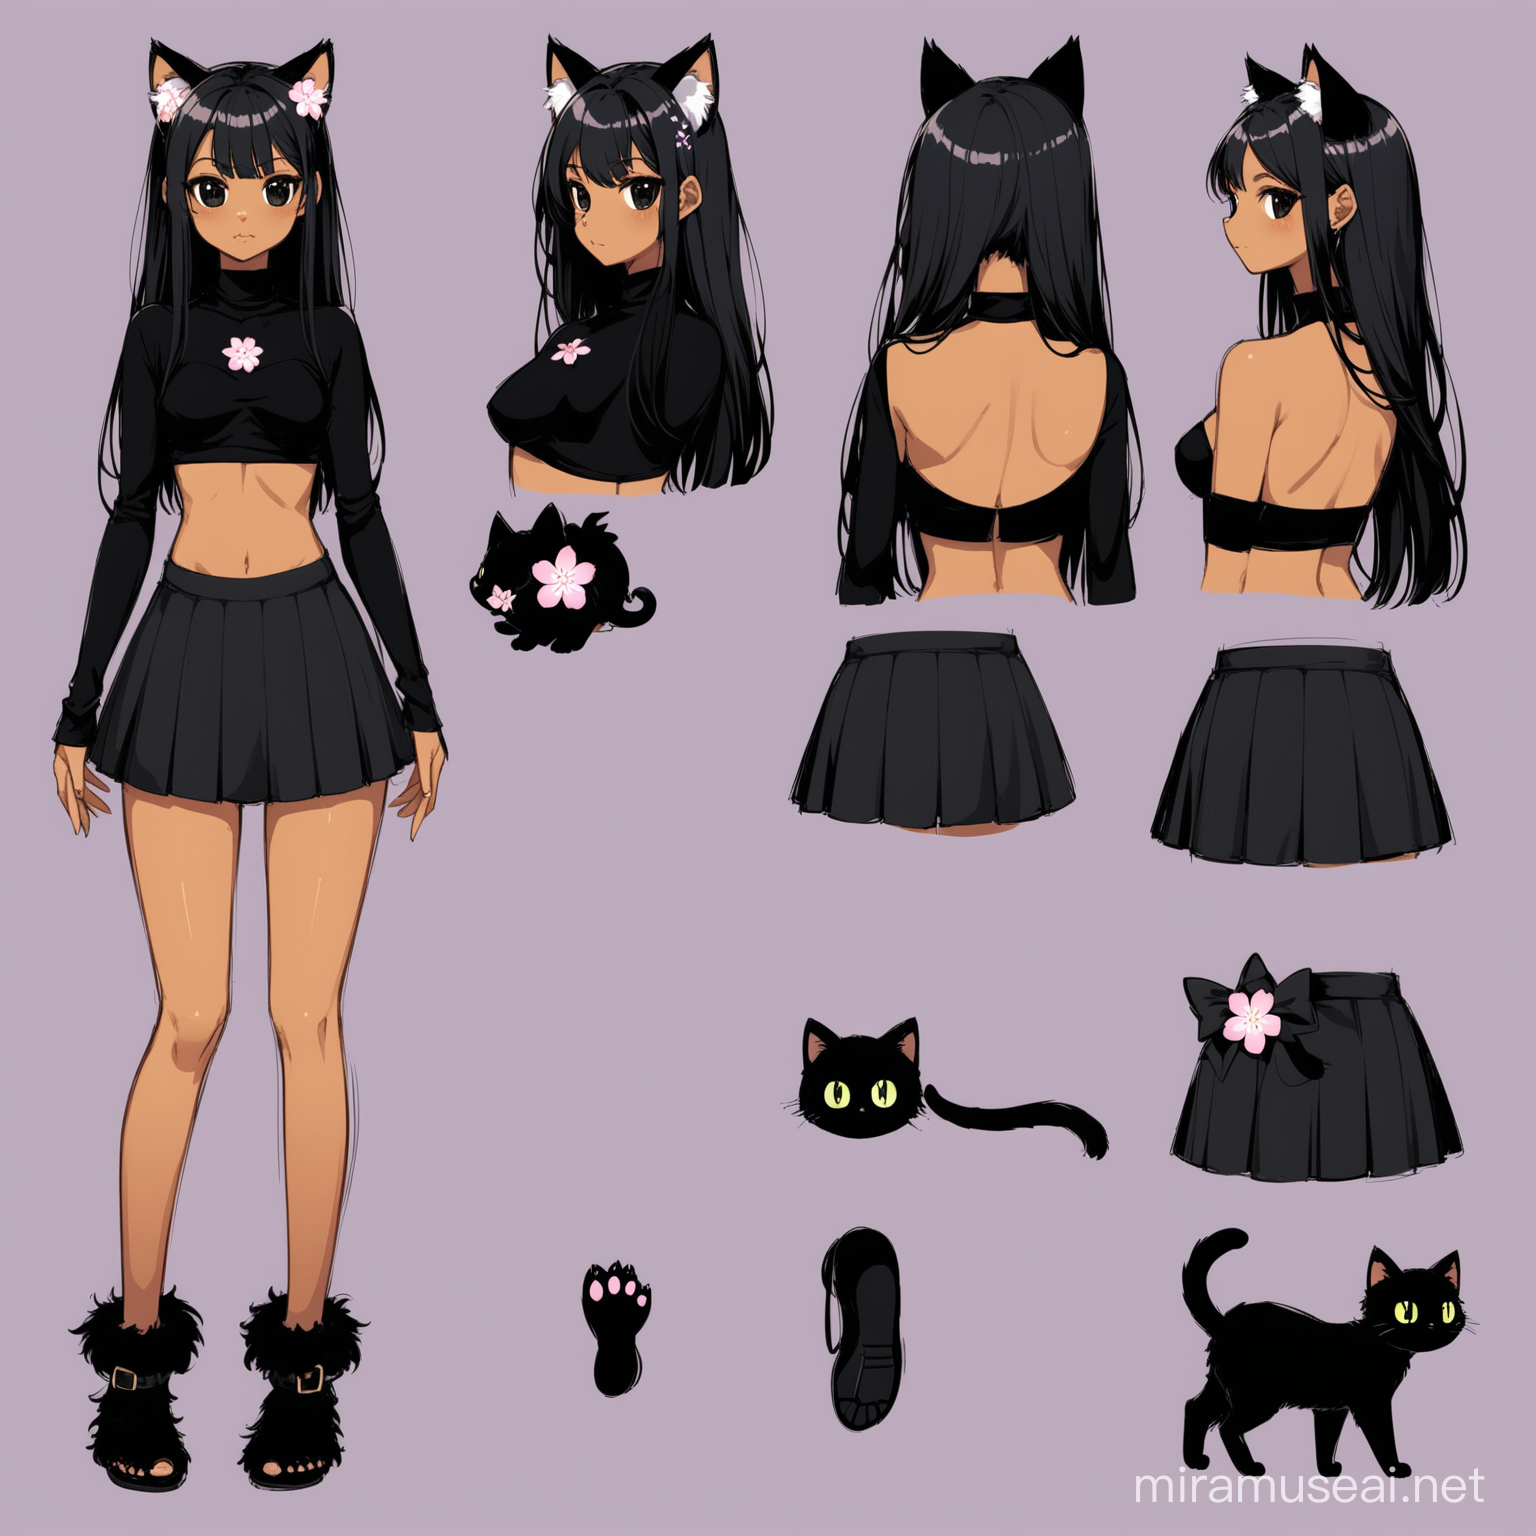 bare vtuber character reference sheet, female, long legs, adult appearance, small waist, flat small chest, long hair, fluffy cat ears, Spirit Blossom style, brown skin, black hair, cat tail with bow on it, black skirt, balck cat paw shoes, black eyes, black crop top with small cleavage, turtle neck long sleeves